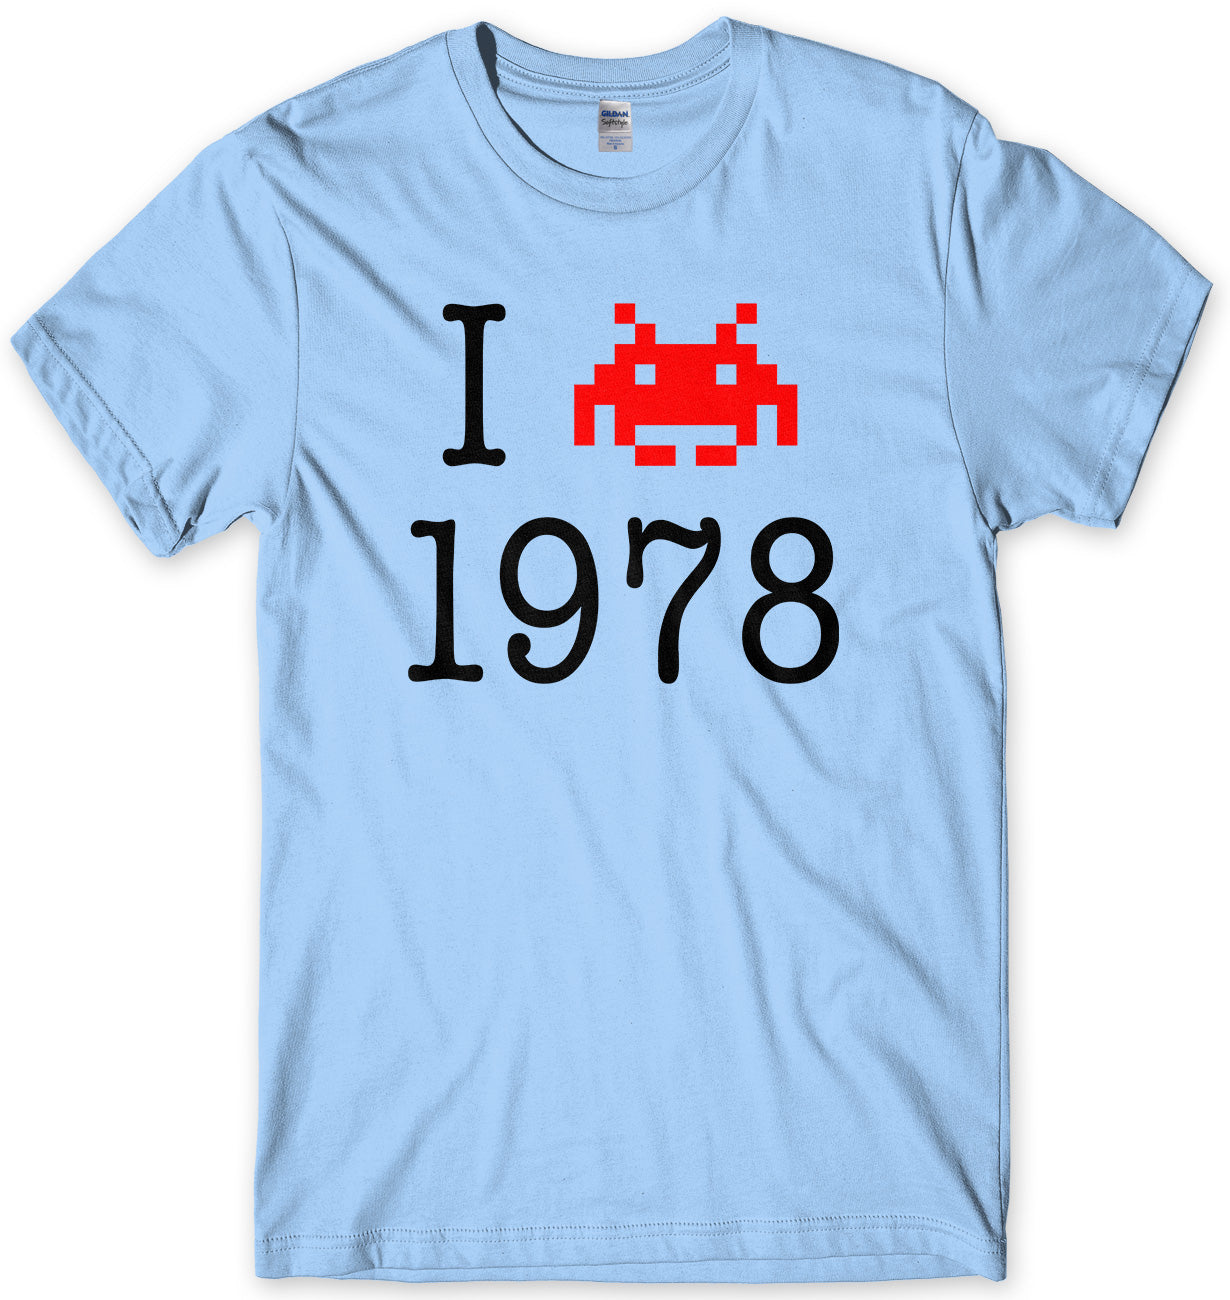 INVADERS FROM SPACE I LOVE 1978 MENS UNISEX T-SHIRT